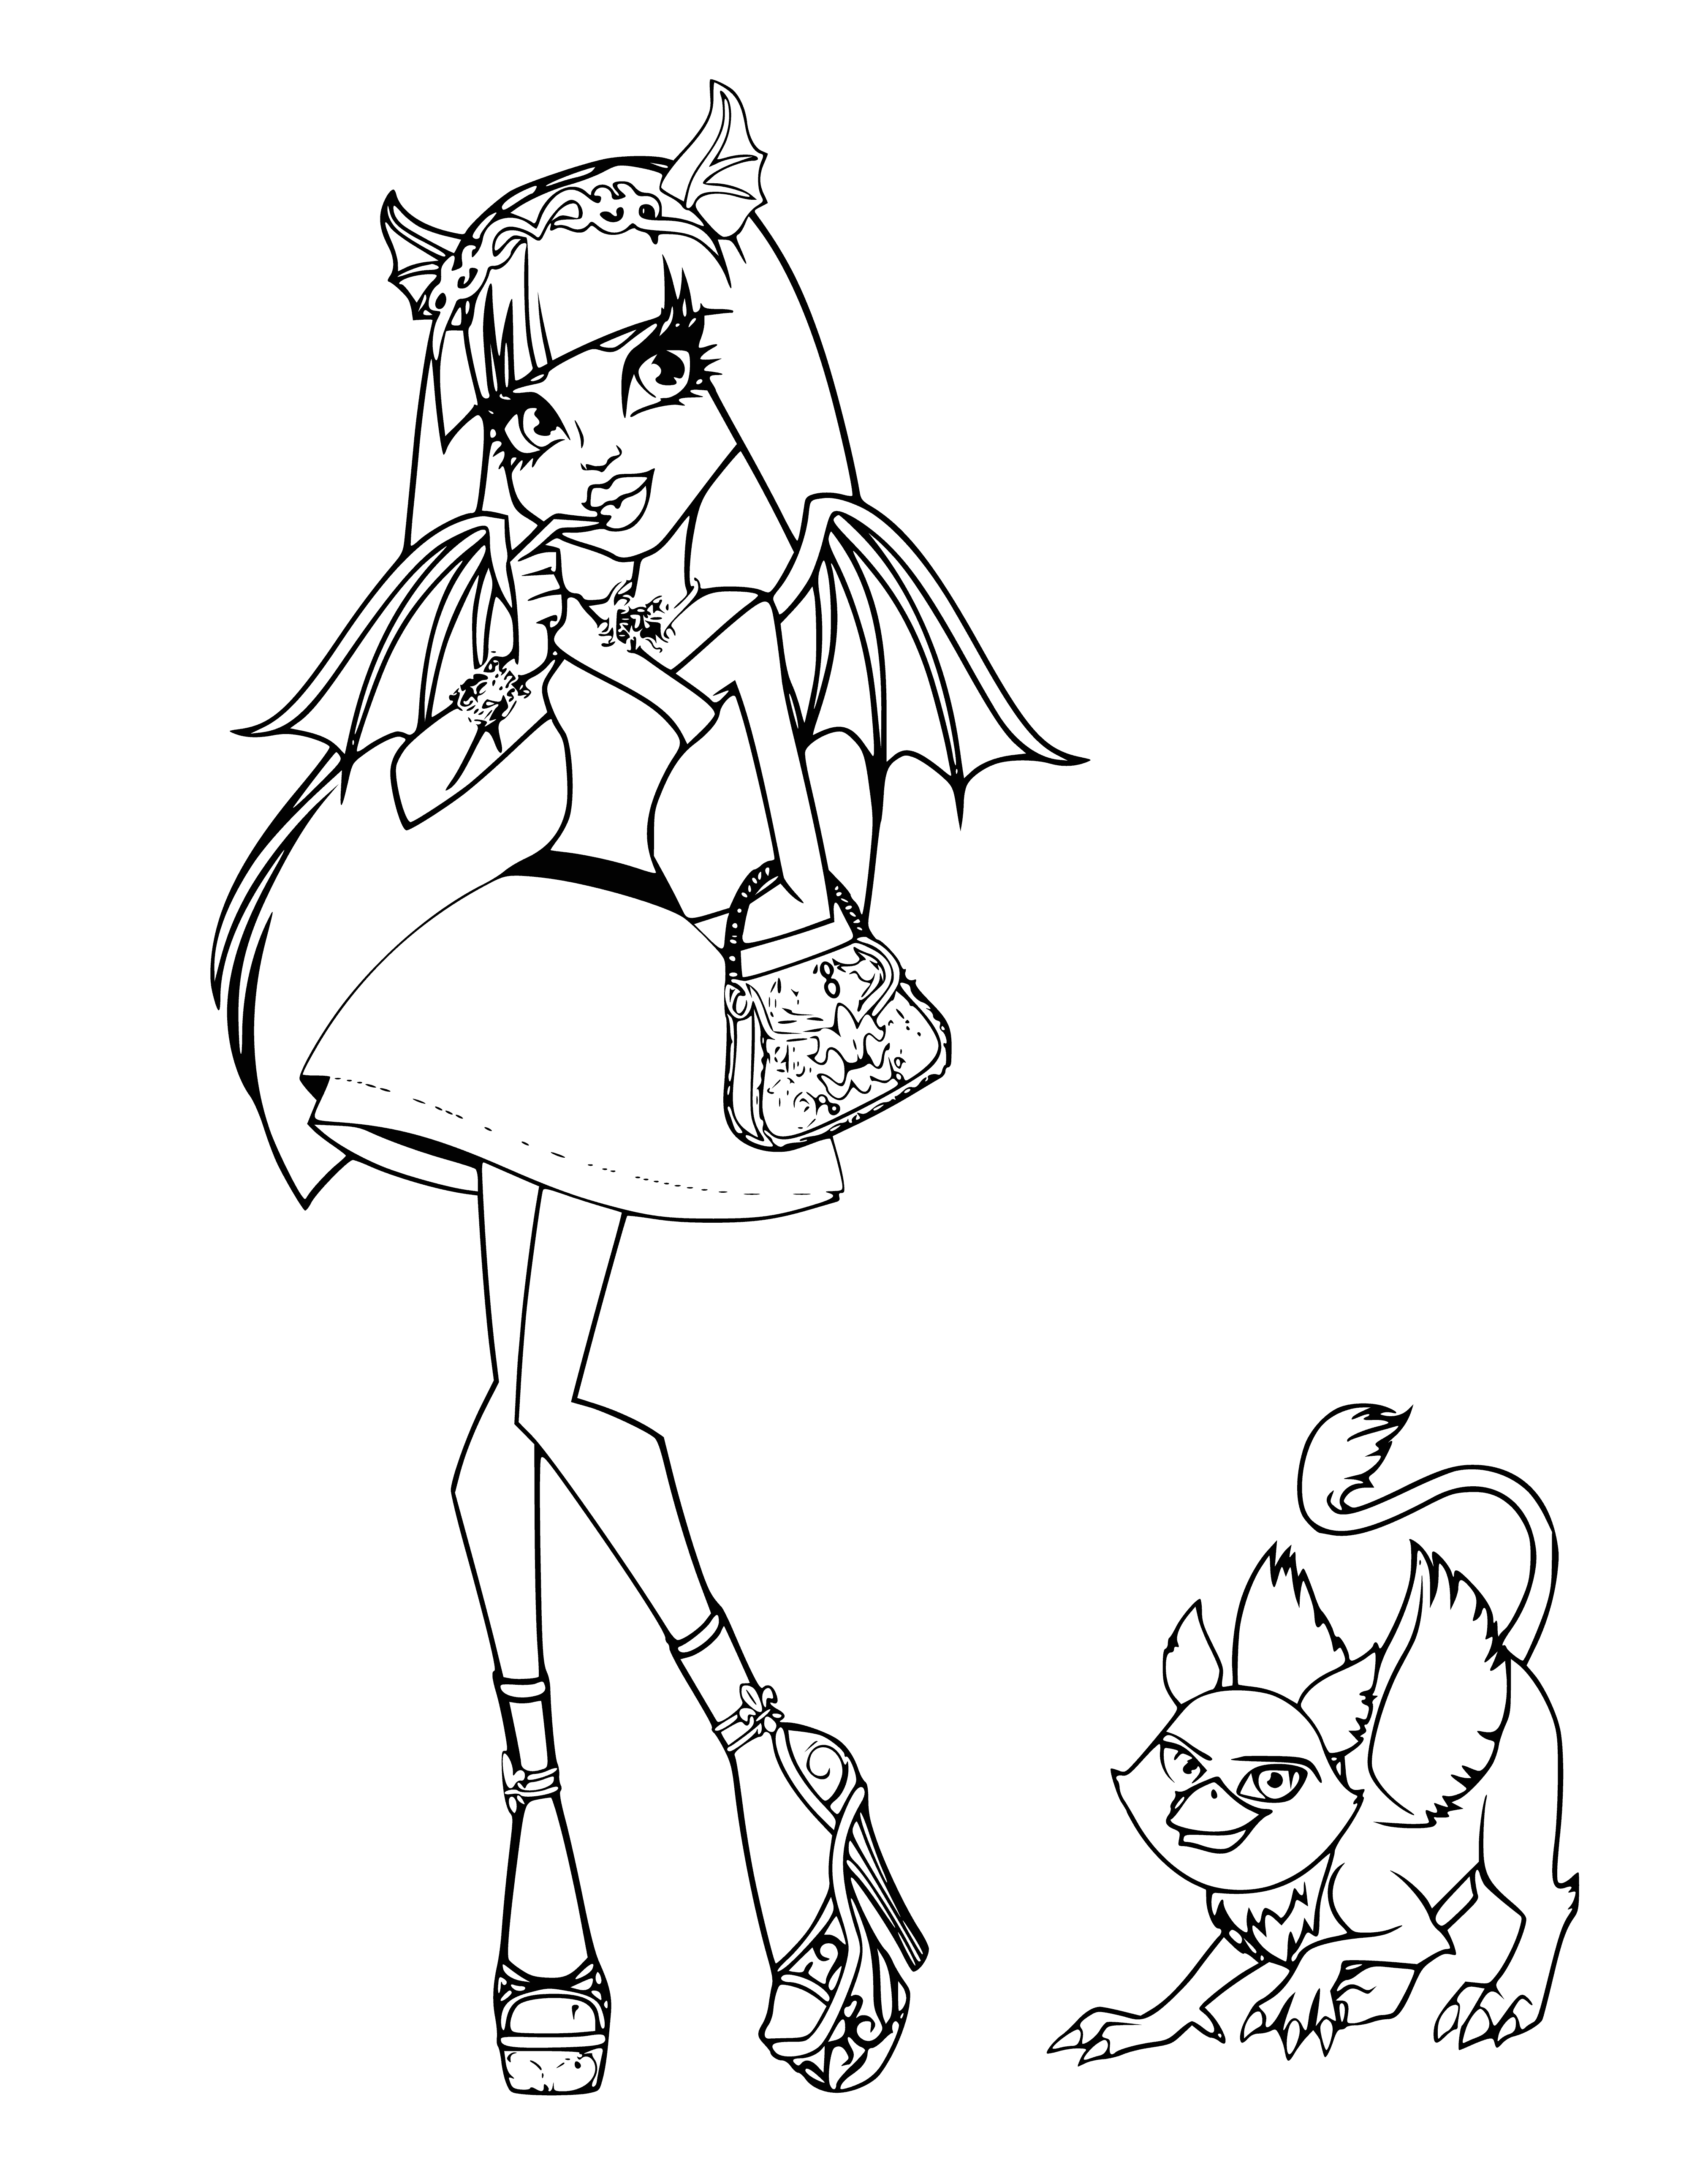 coloring page: 16-year-old fashion student Rochelle Goyle moved to France to attend Poe Univ. and found a pet gargoyle Roo. Close to her Canadian friend Nephrite, Rochelle is shy yet kind.